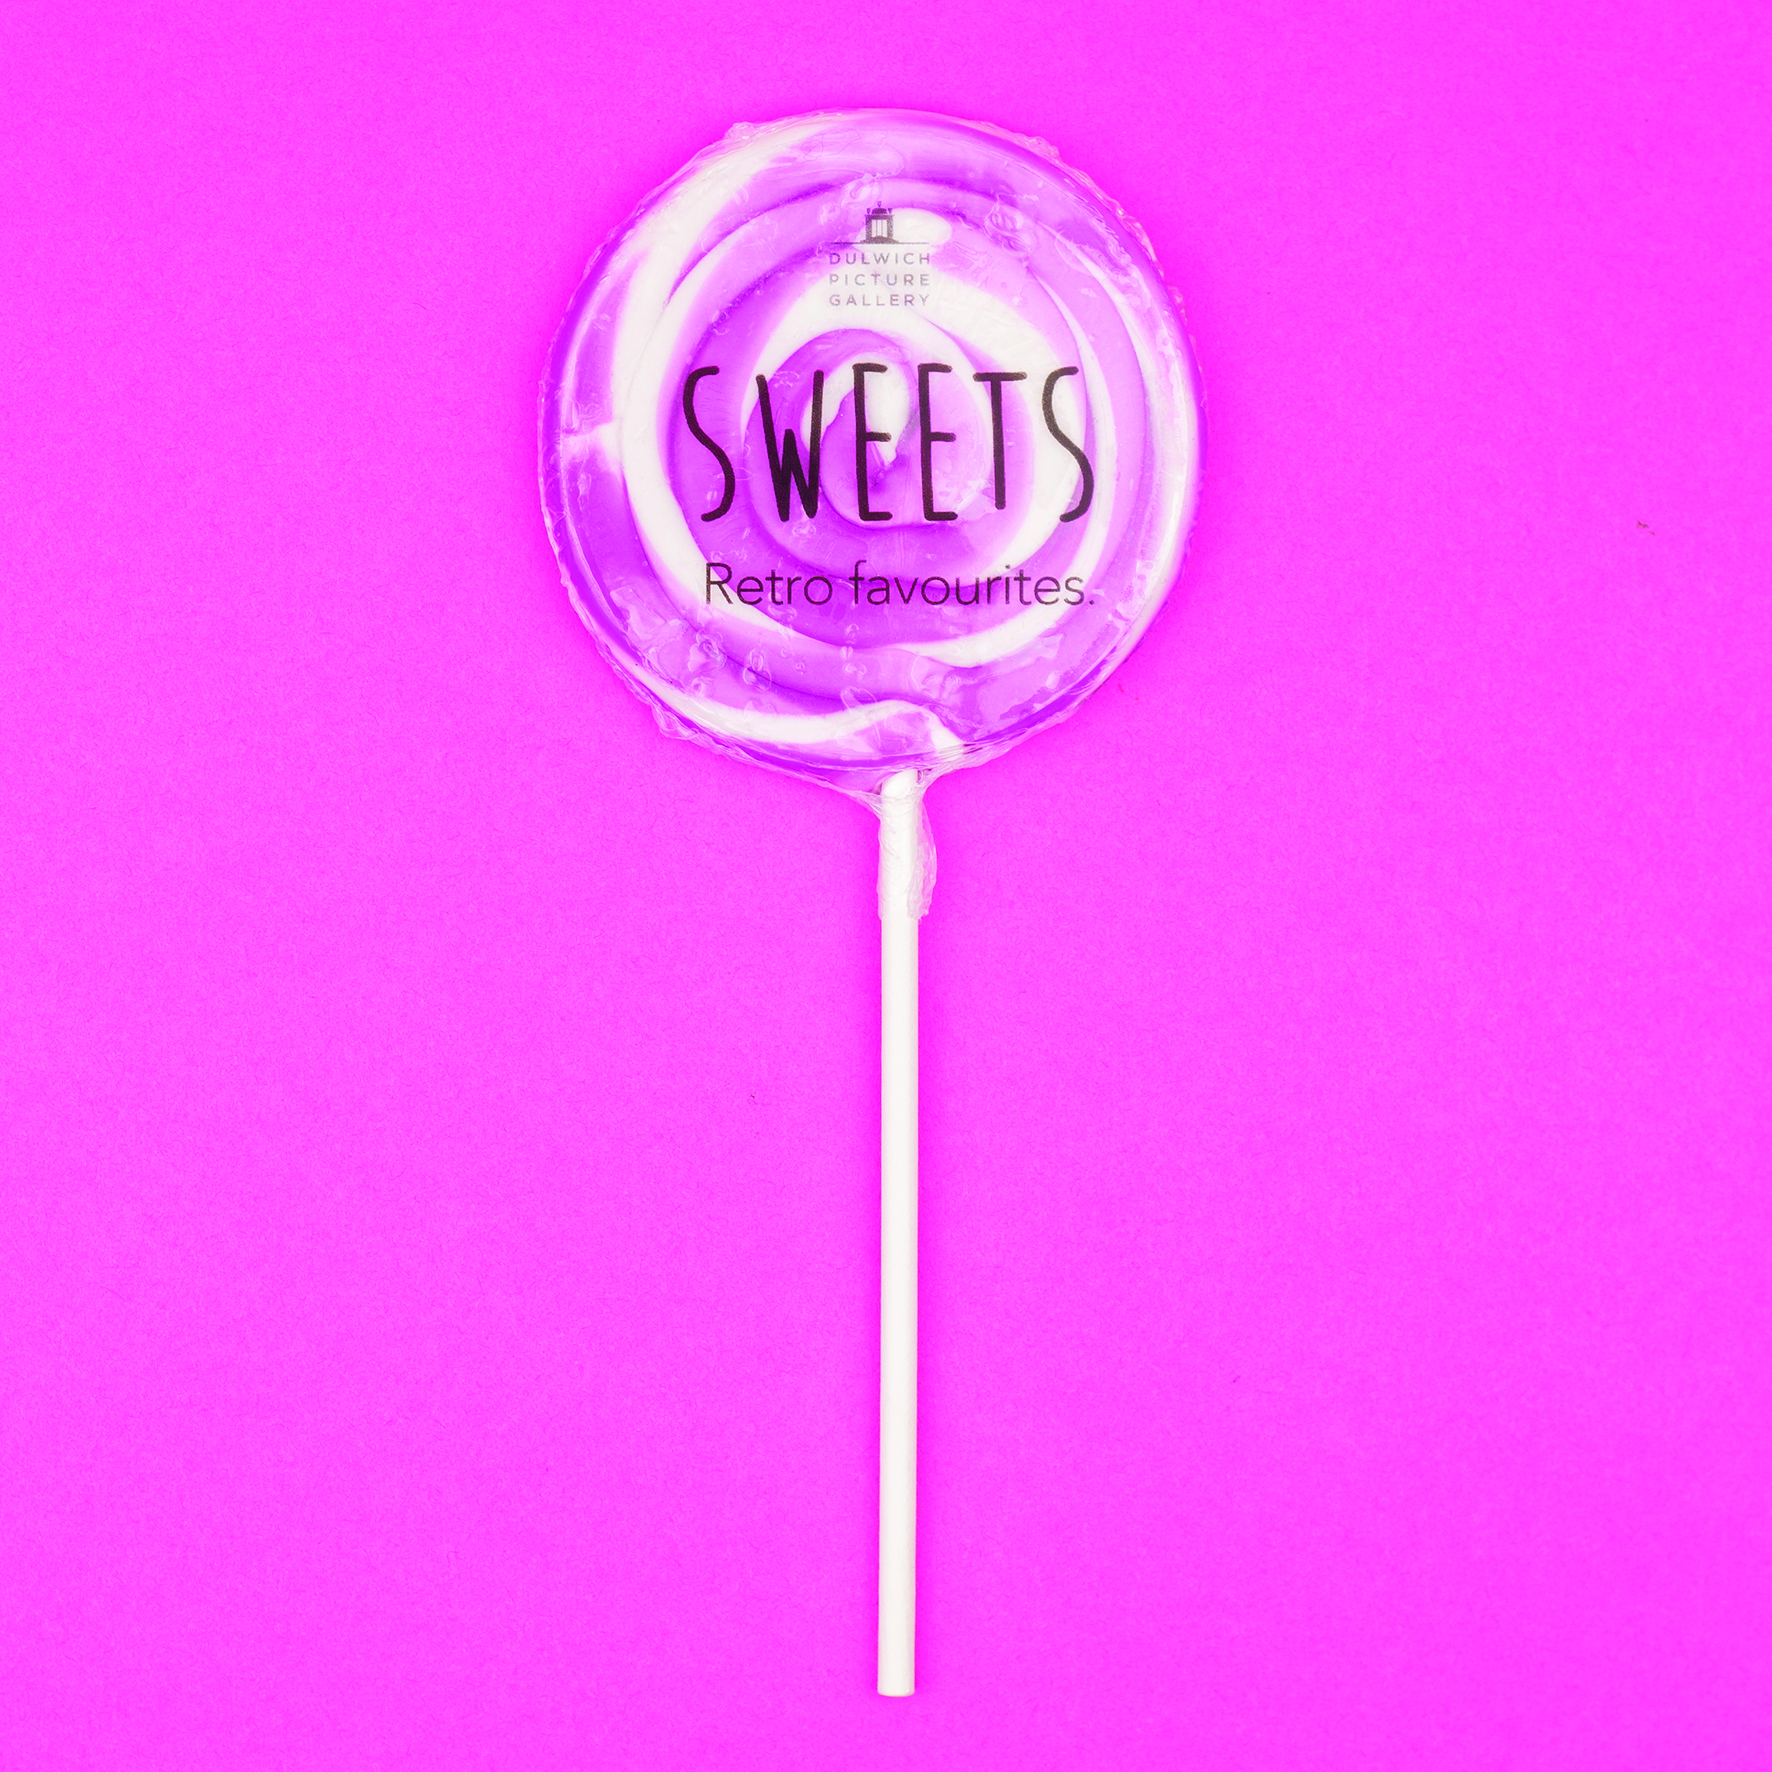 ‘Sweets for my sweet, sugar for my honey’